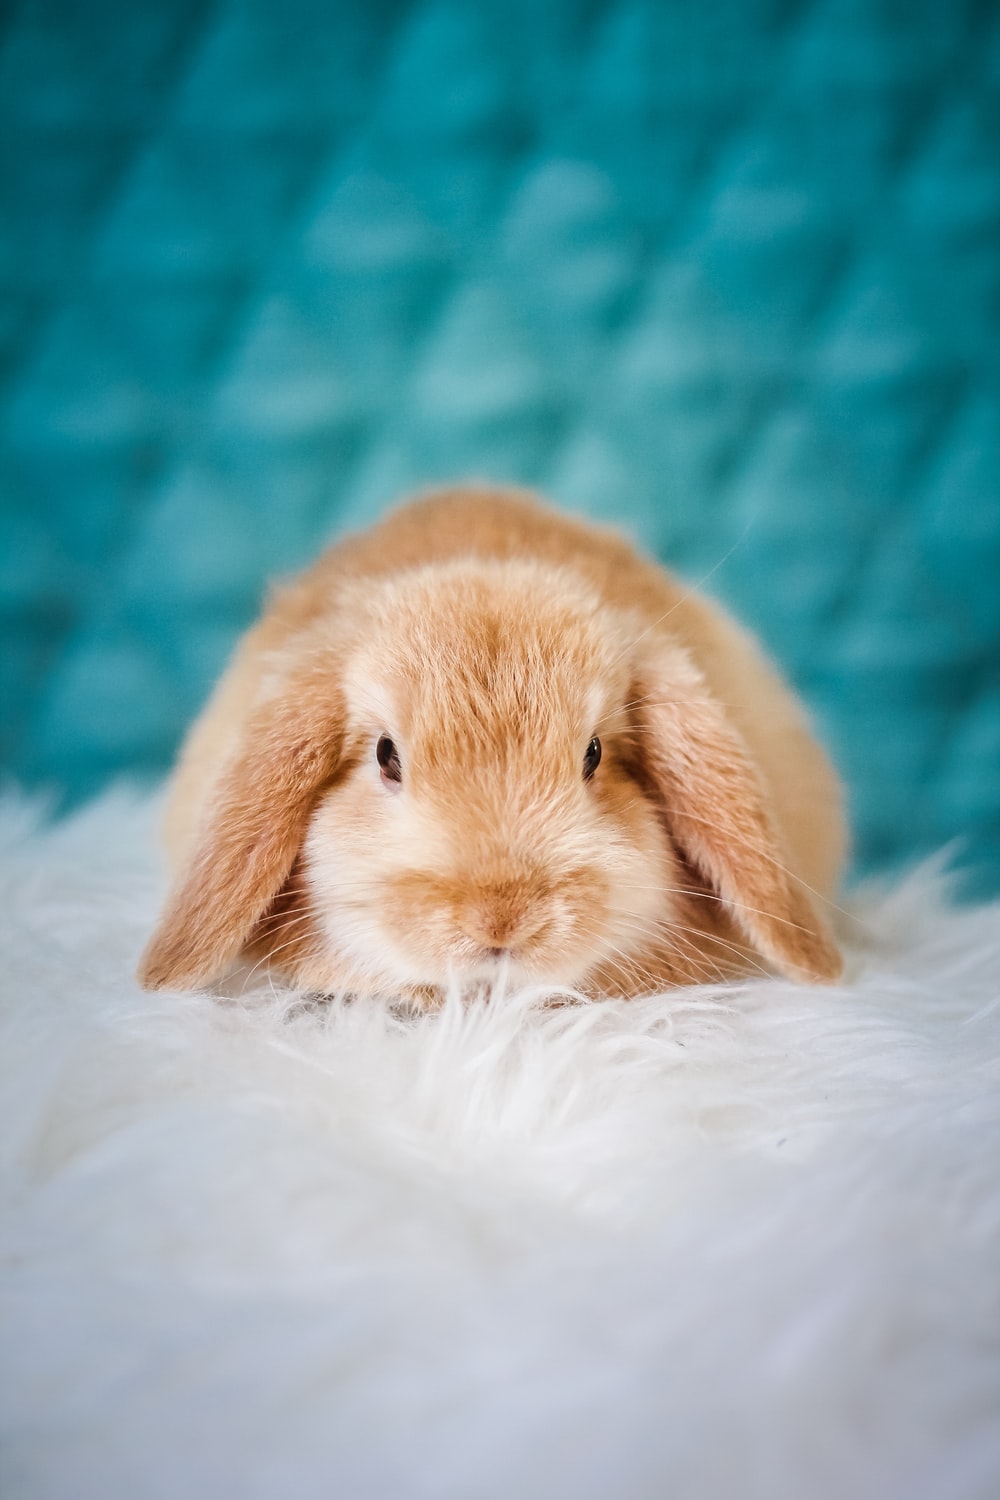 Rabbit Picture [HD]. Download Free Image